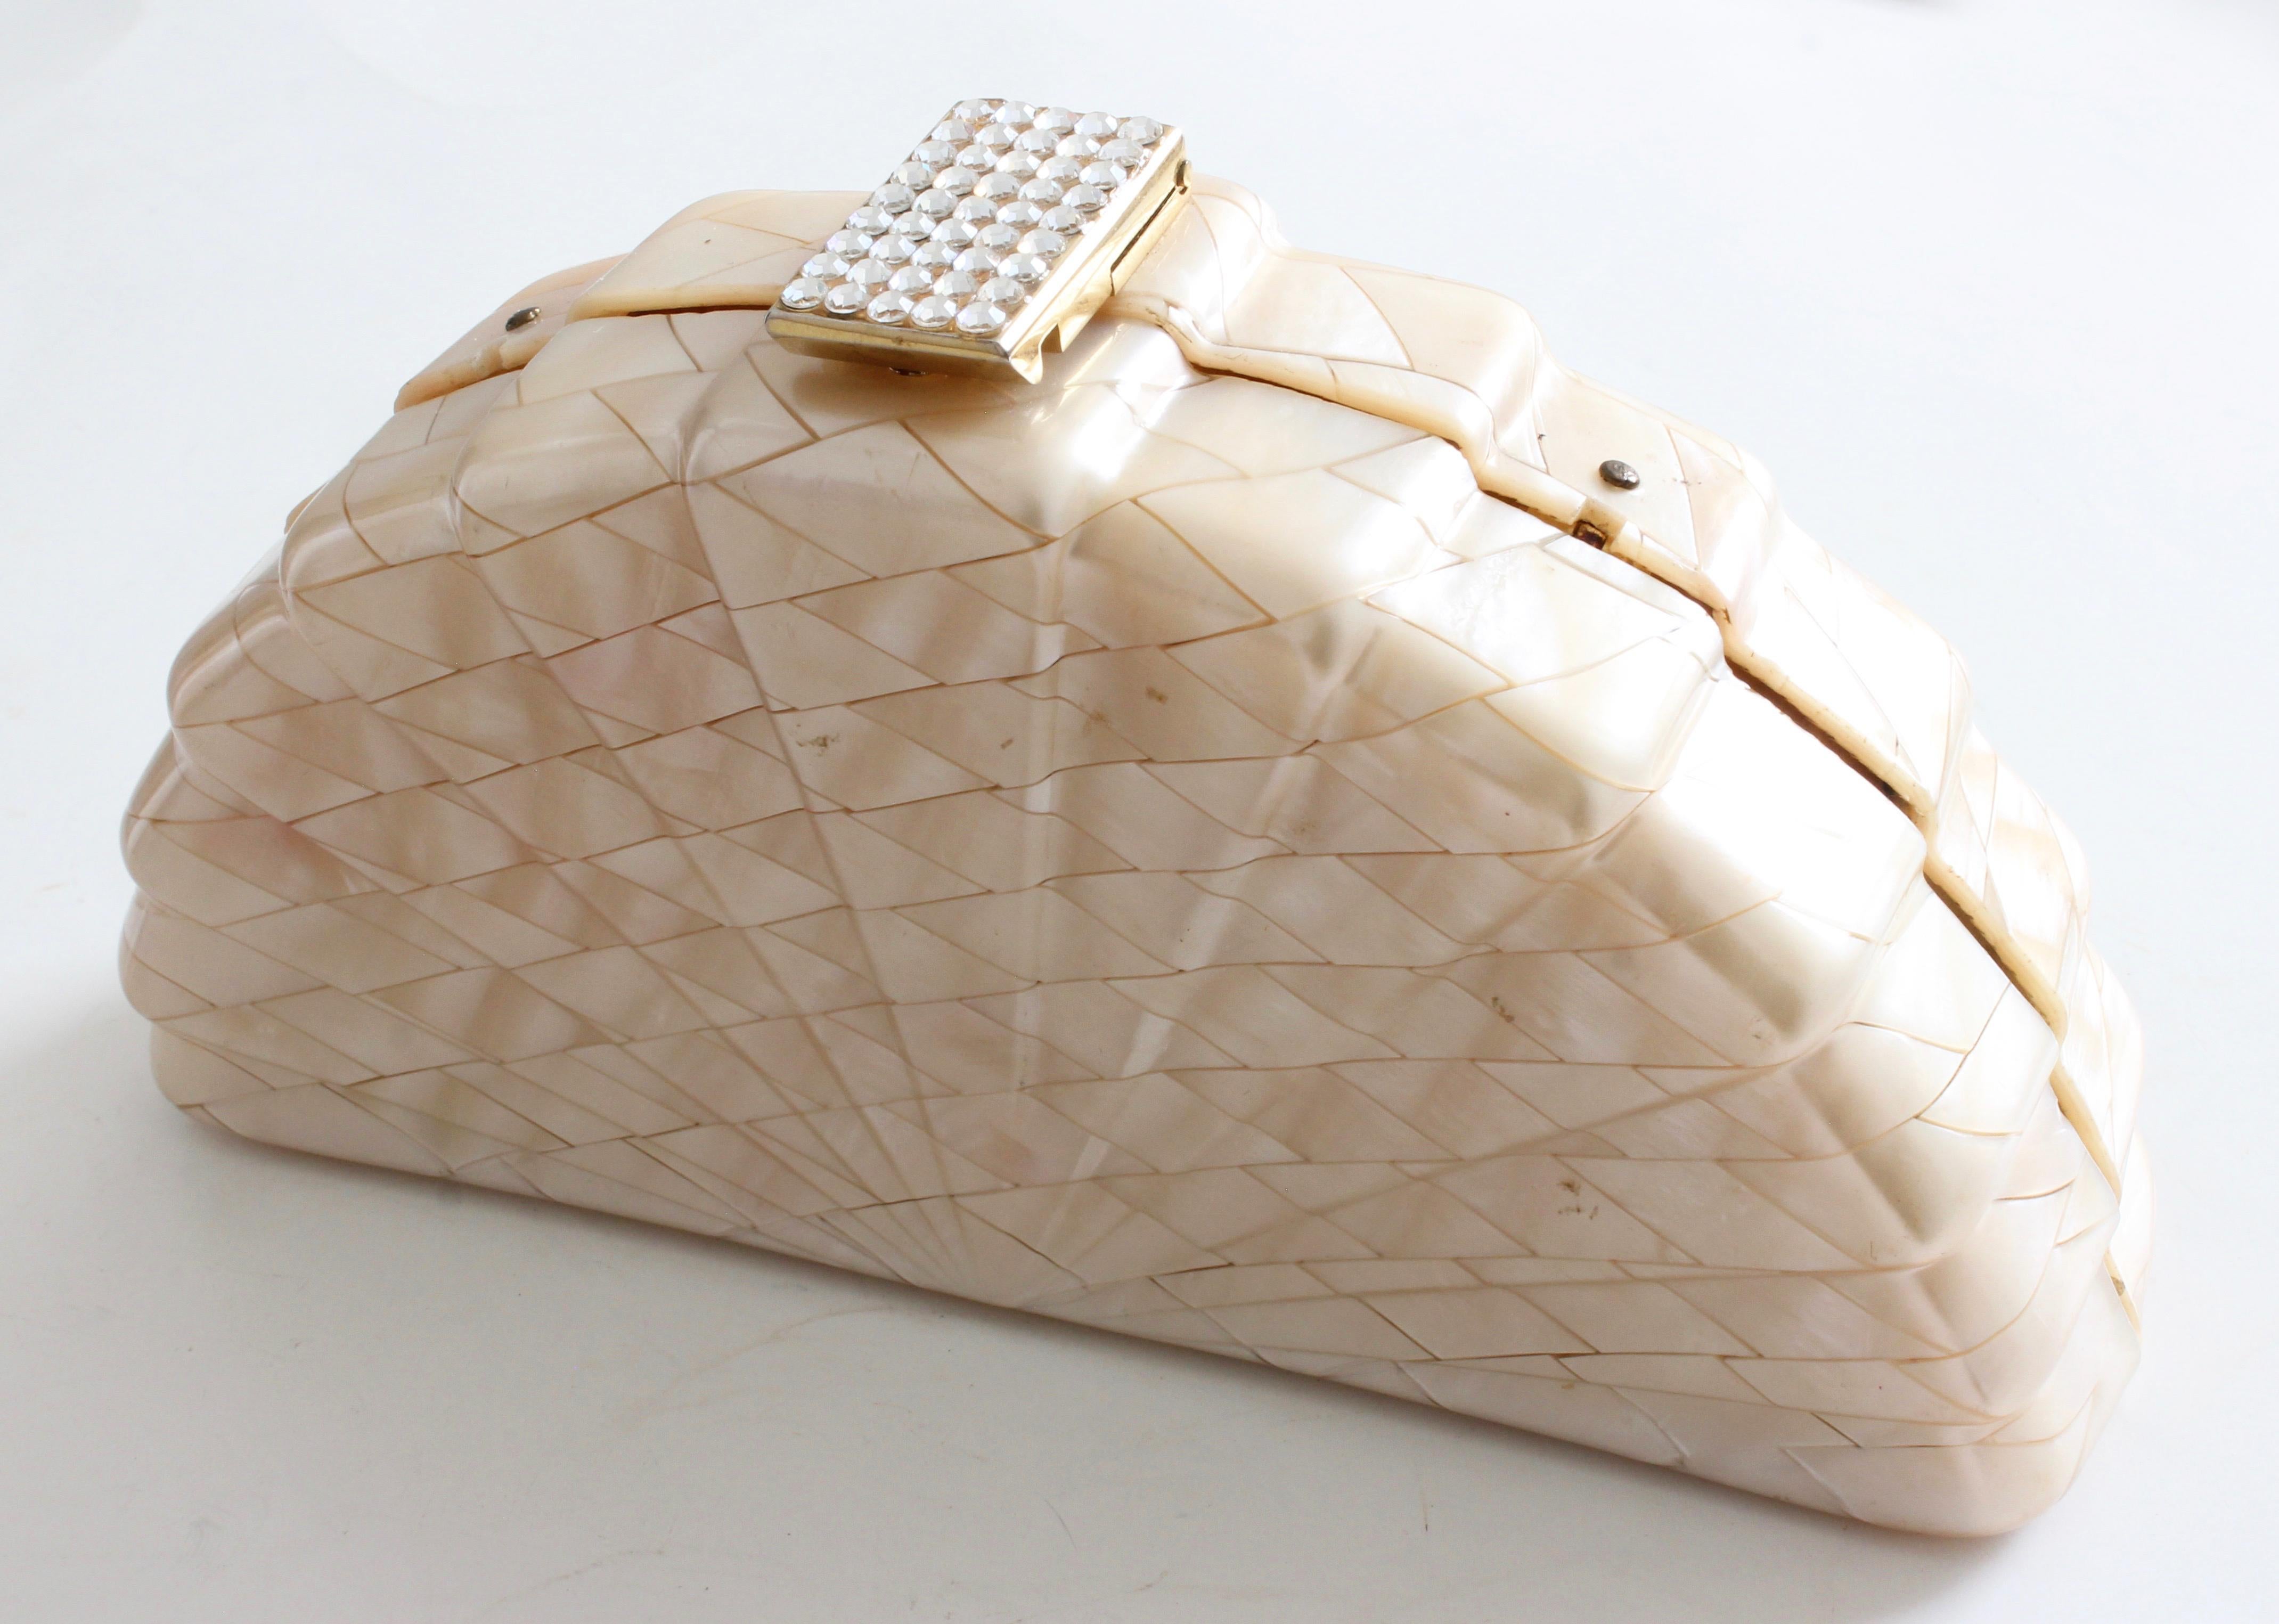 This fabulous little bag was made in Italy for Saks Fifth Avenue, most likely in the early 1960s.  Made from what appears to be highly polished shells in a modern mosaic pattern, this bag fastens with a rhinestone-encrusted latch and features a gold